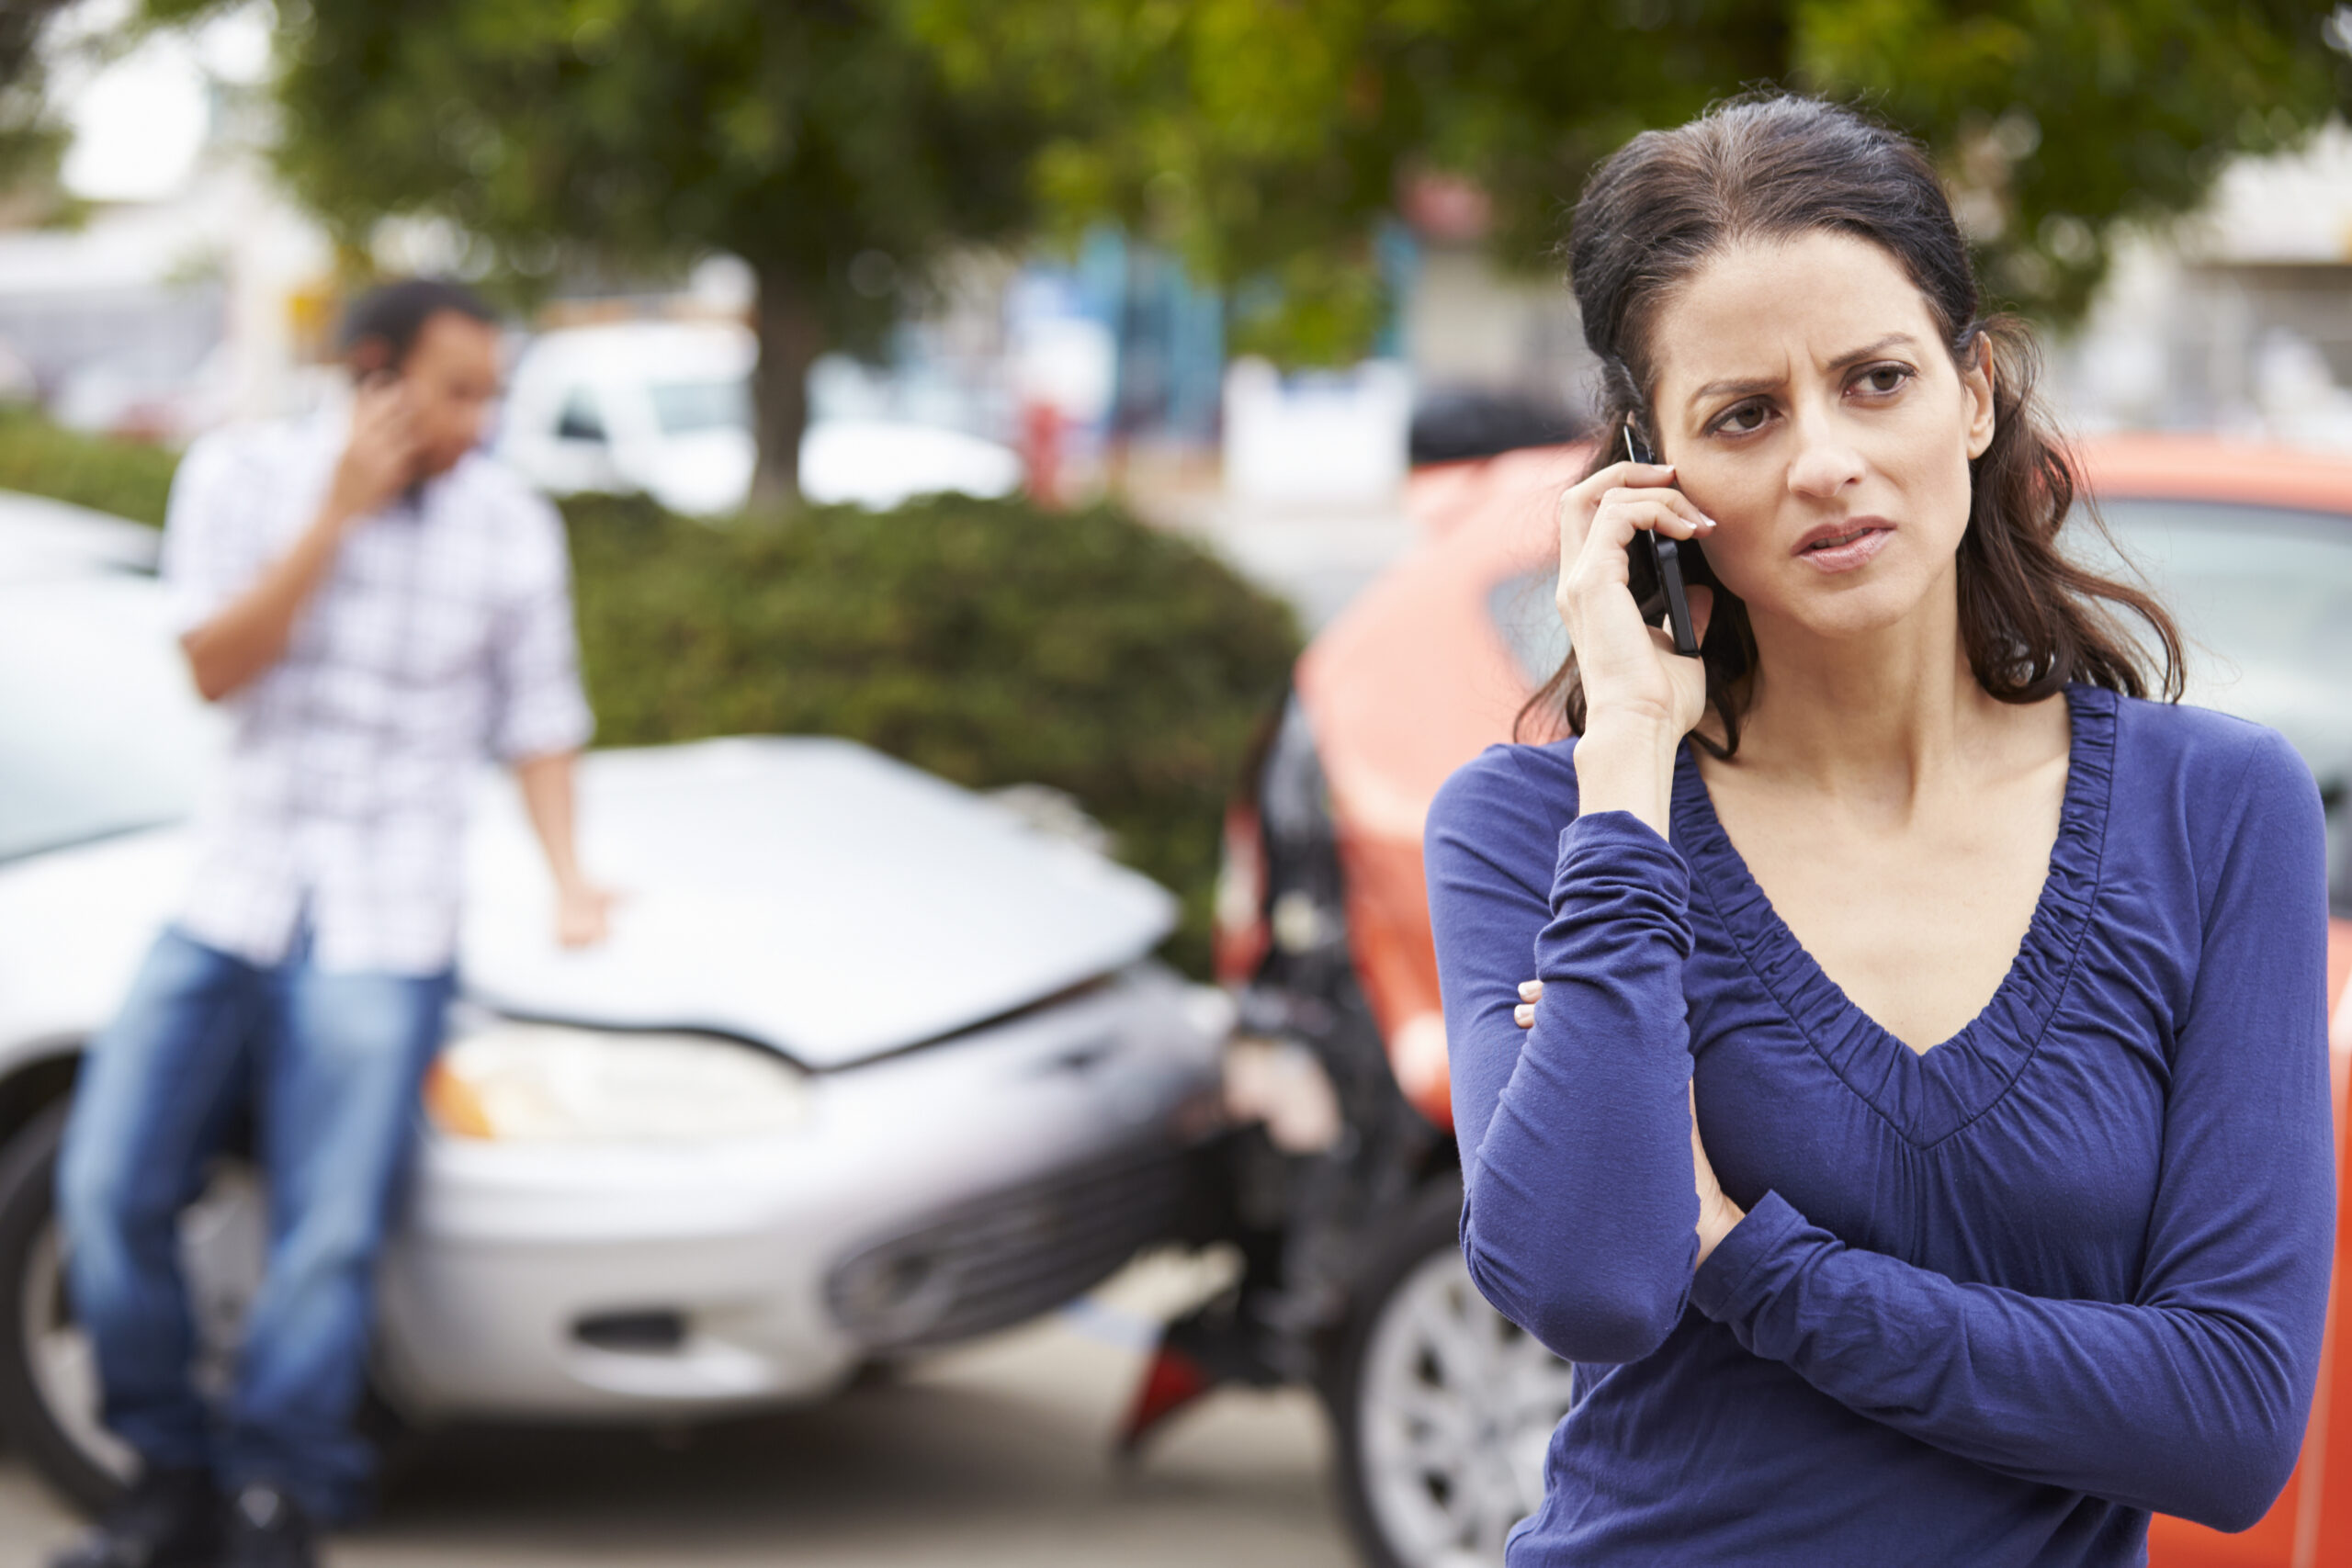 Making Phone Call After Traffic Accident